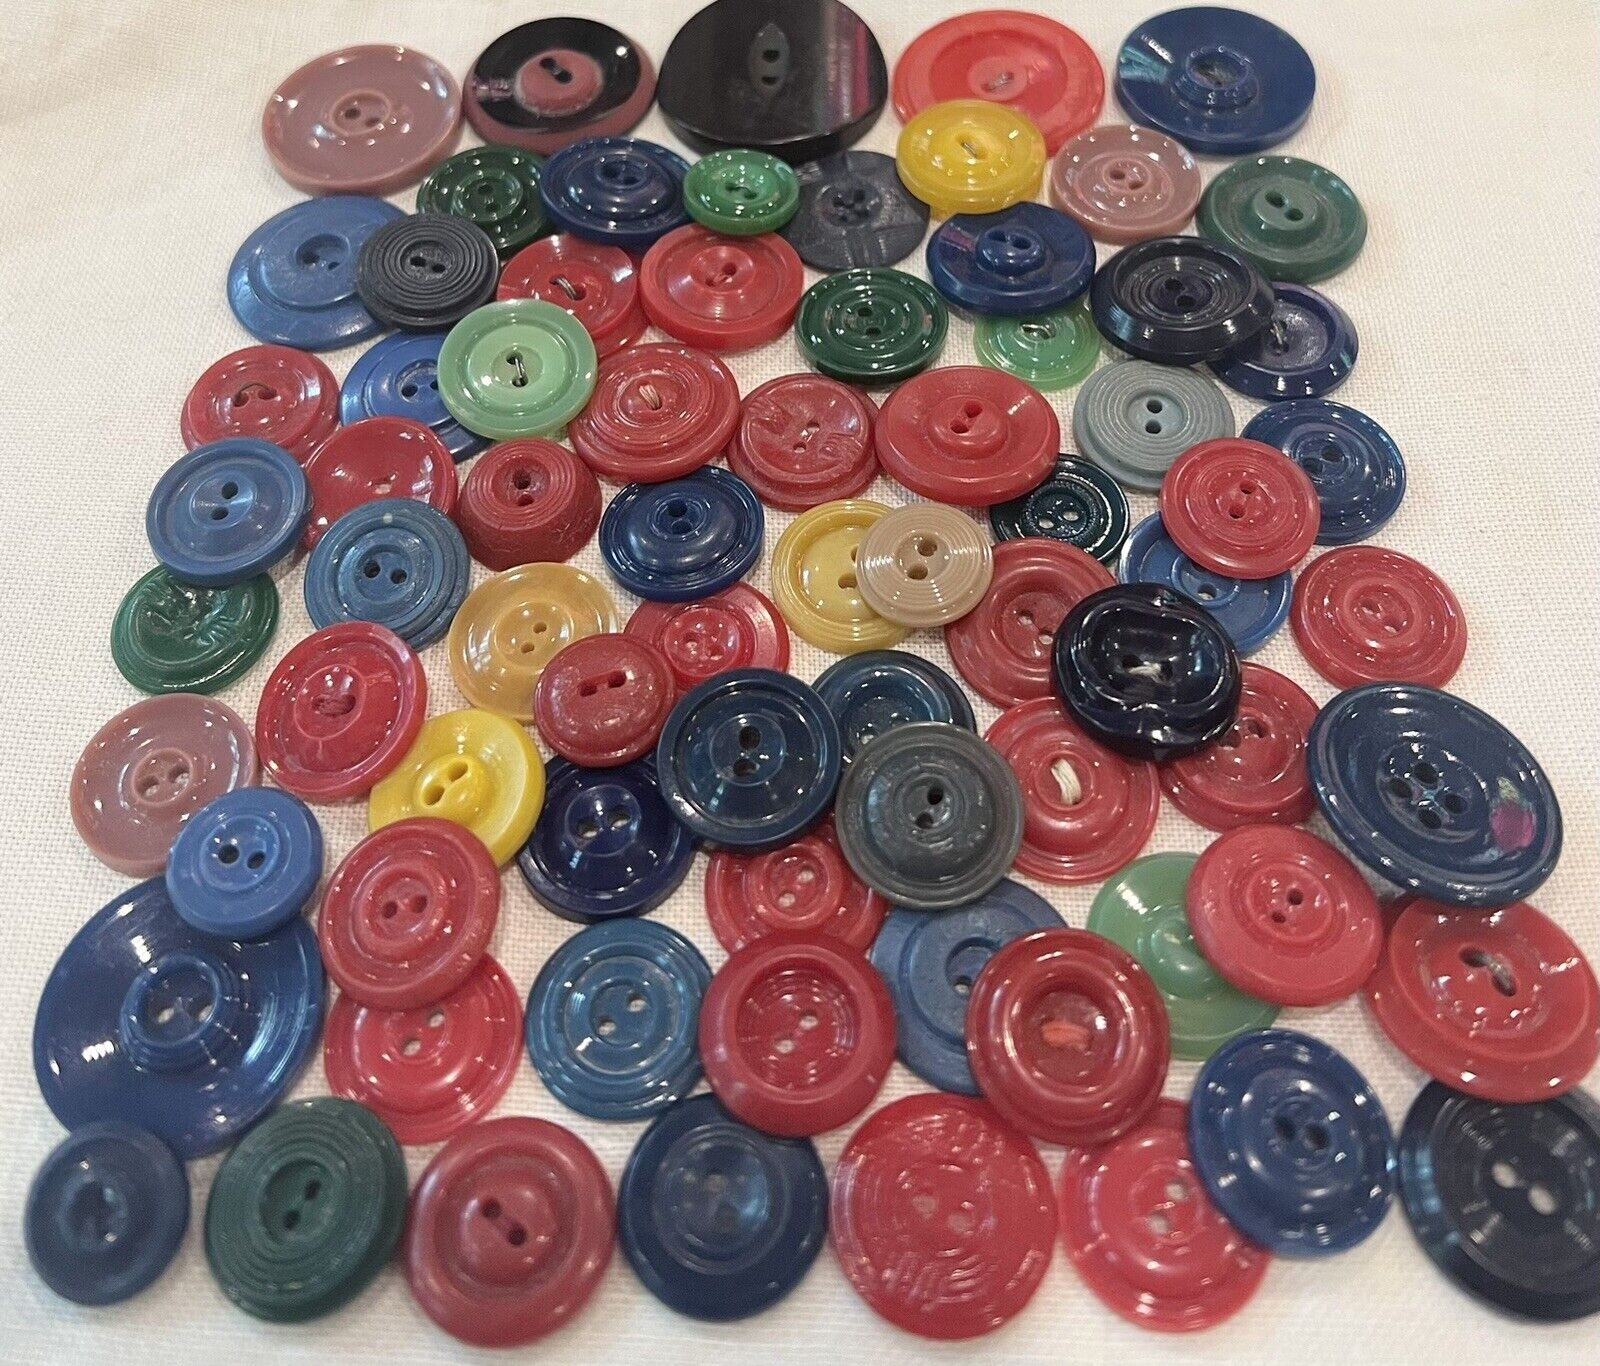 Vintage Old Colorful Celluloids Plastics 81 Buttons Lot Mixed Variety Sets